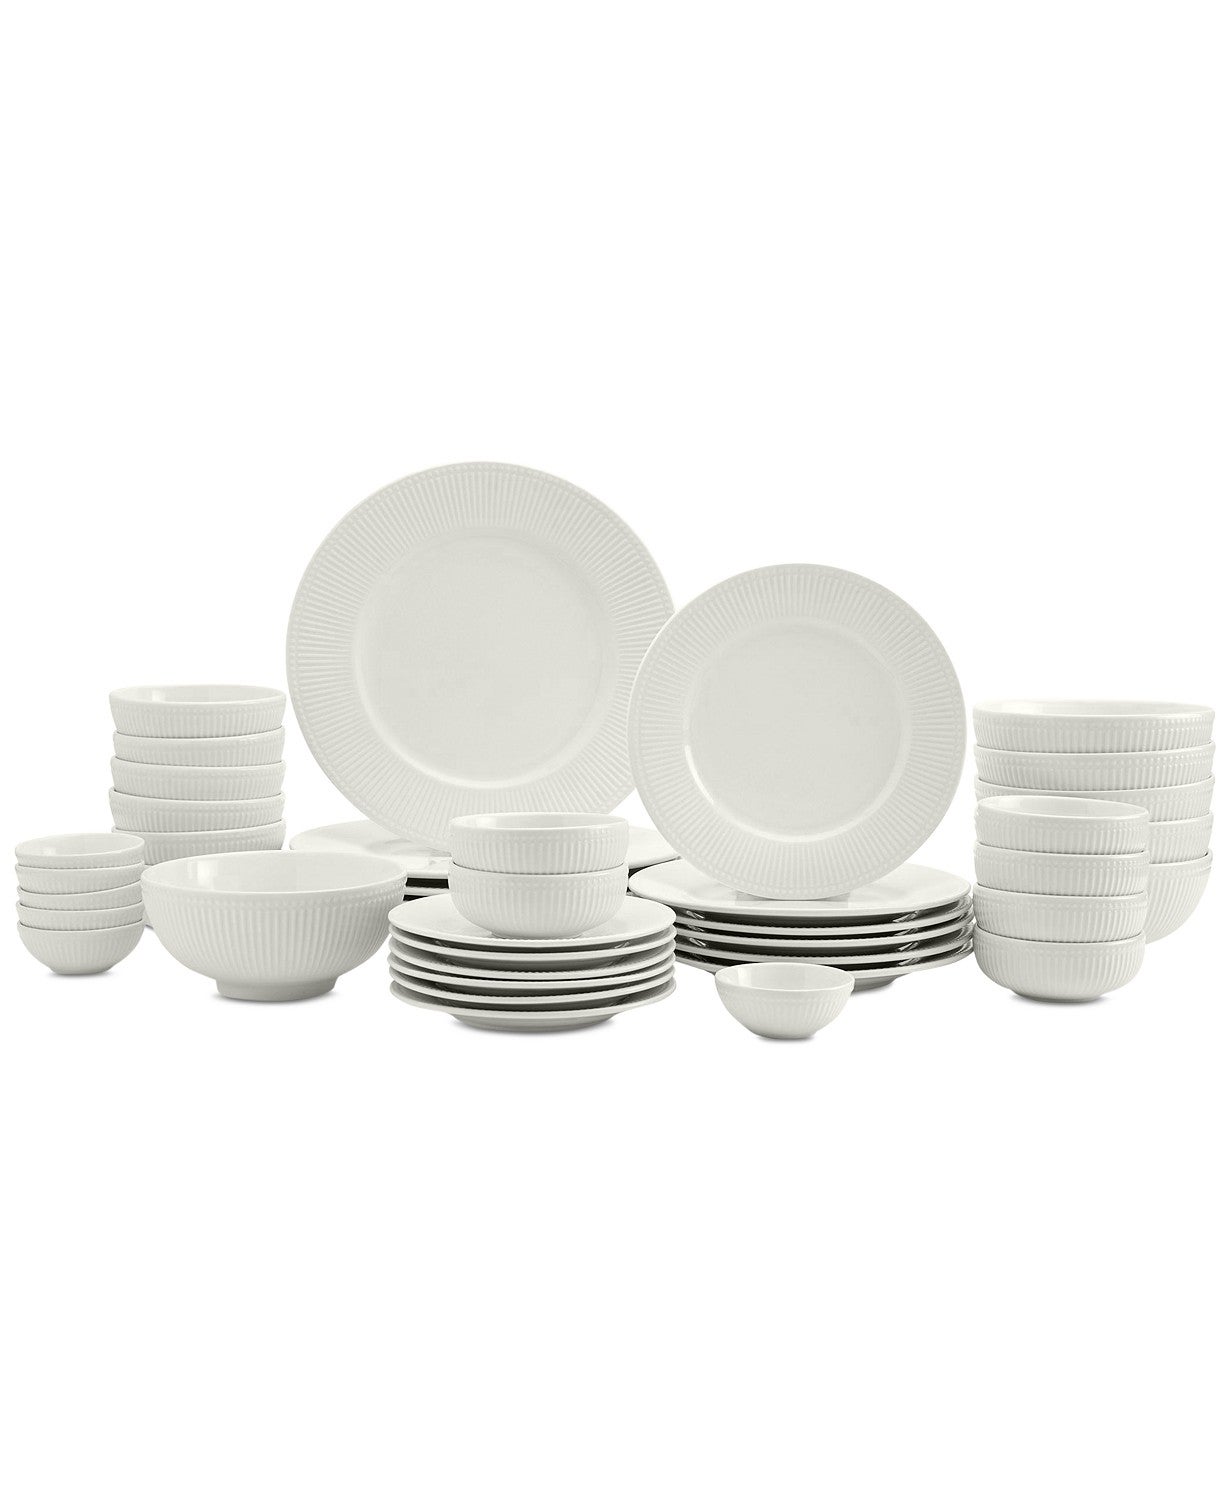 Tabletops Unlimited Inspiration by Denmark Fiore 42-PC. Dinnerware Set